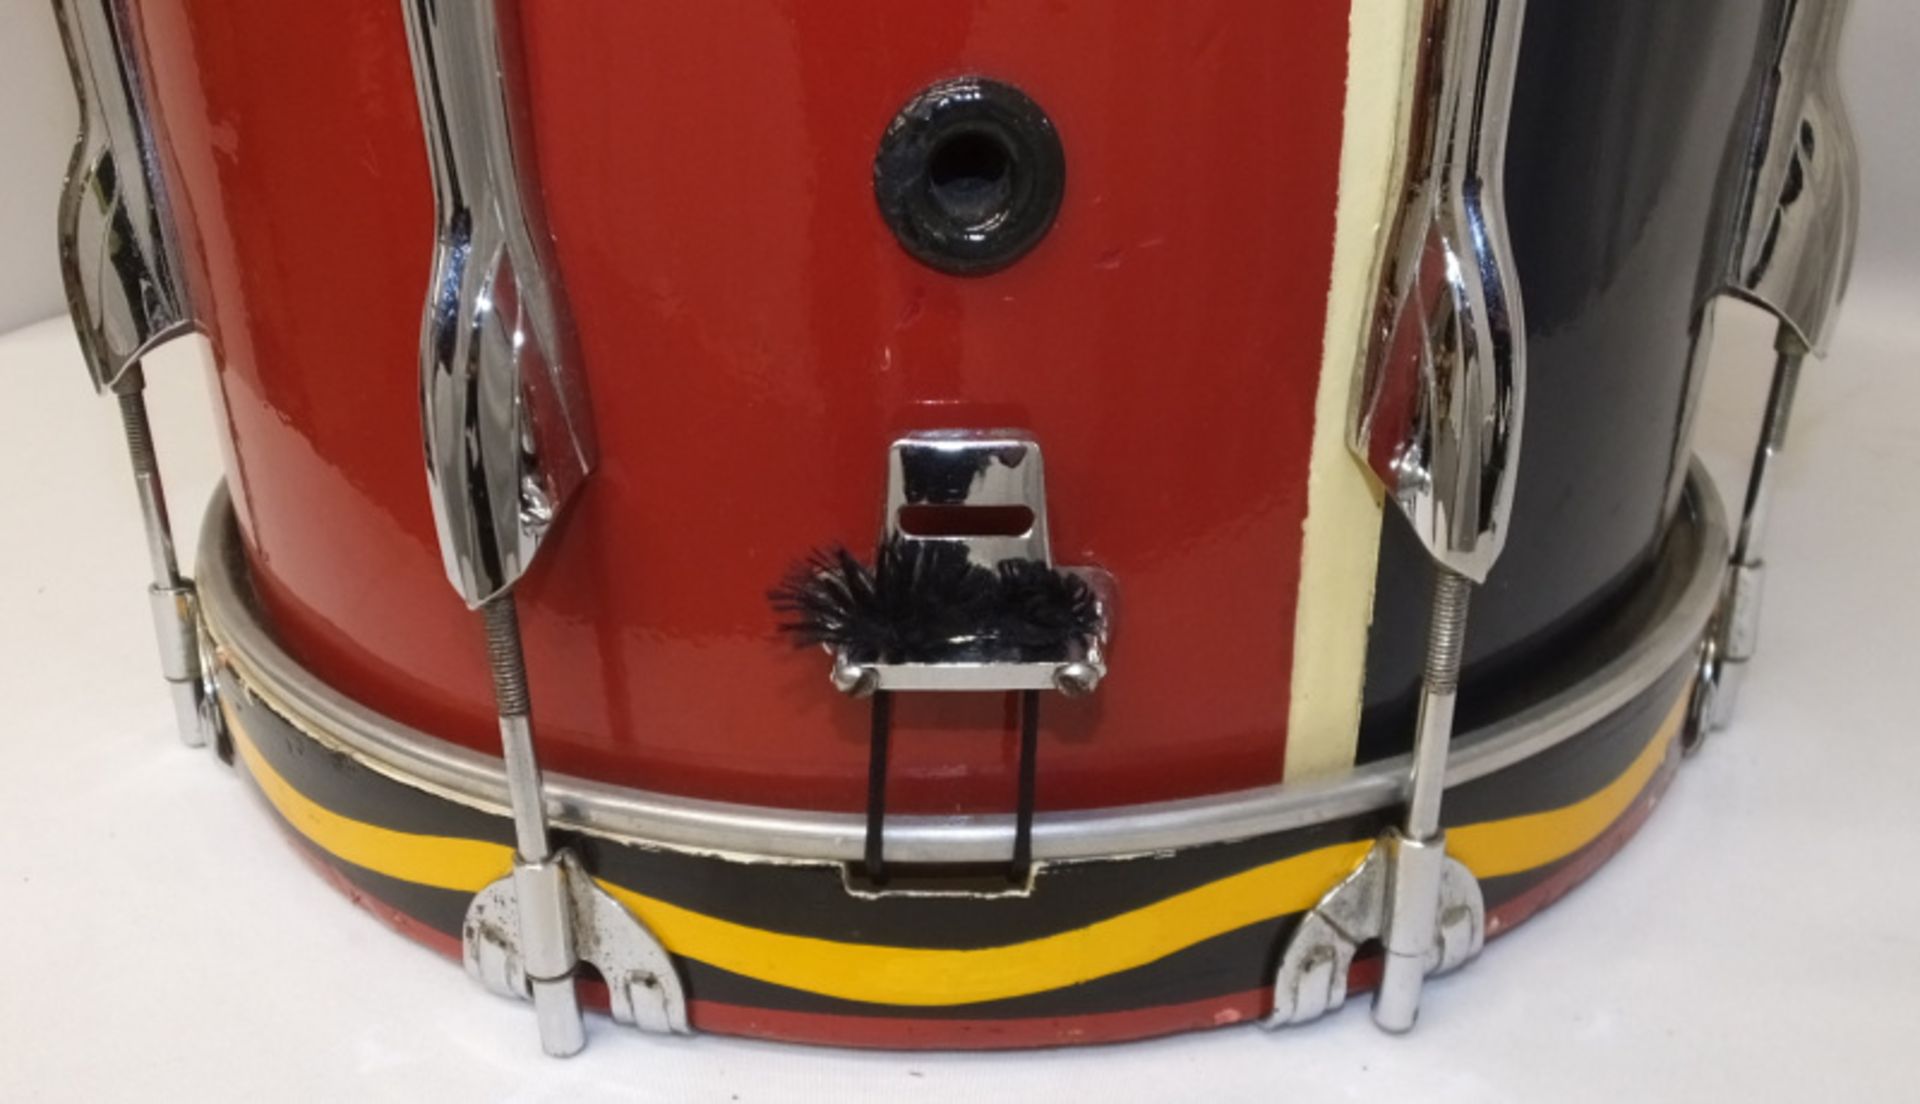 Premier Marching Snare Drum - 14 x 14 inch with Remo Emperor X head - Please check photos - Image 5 of 7